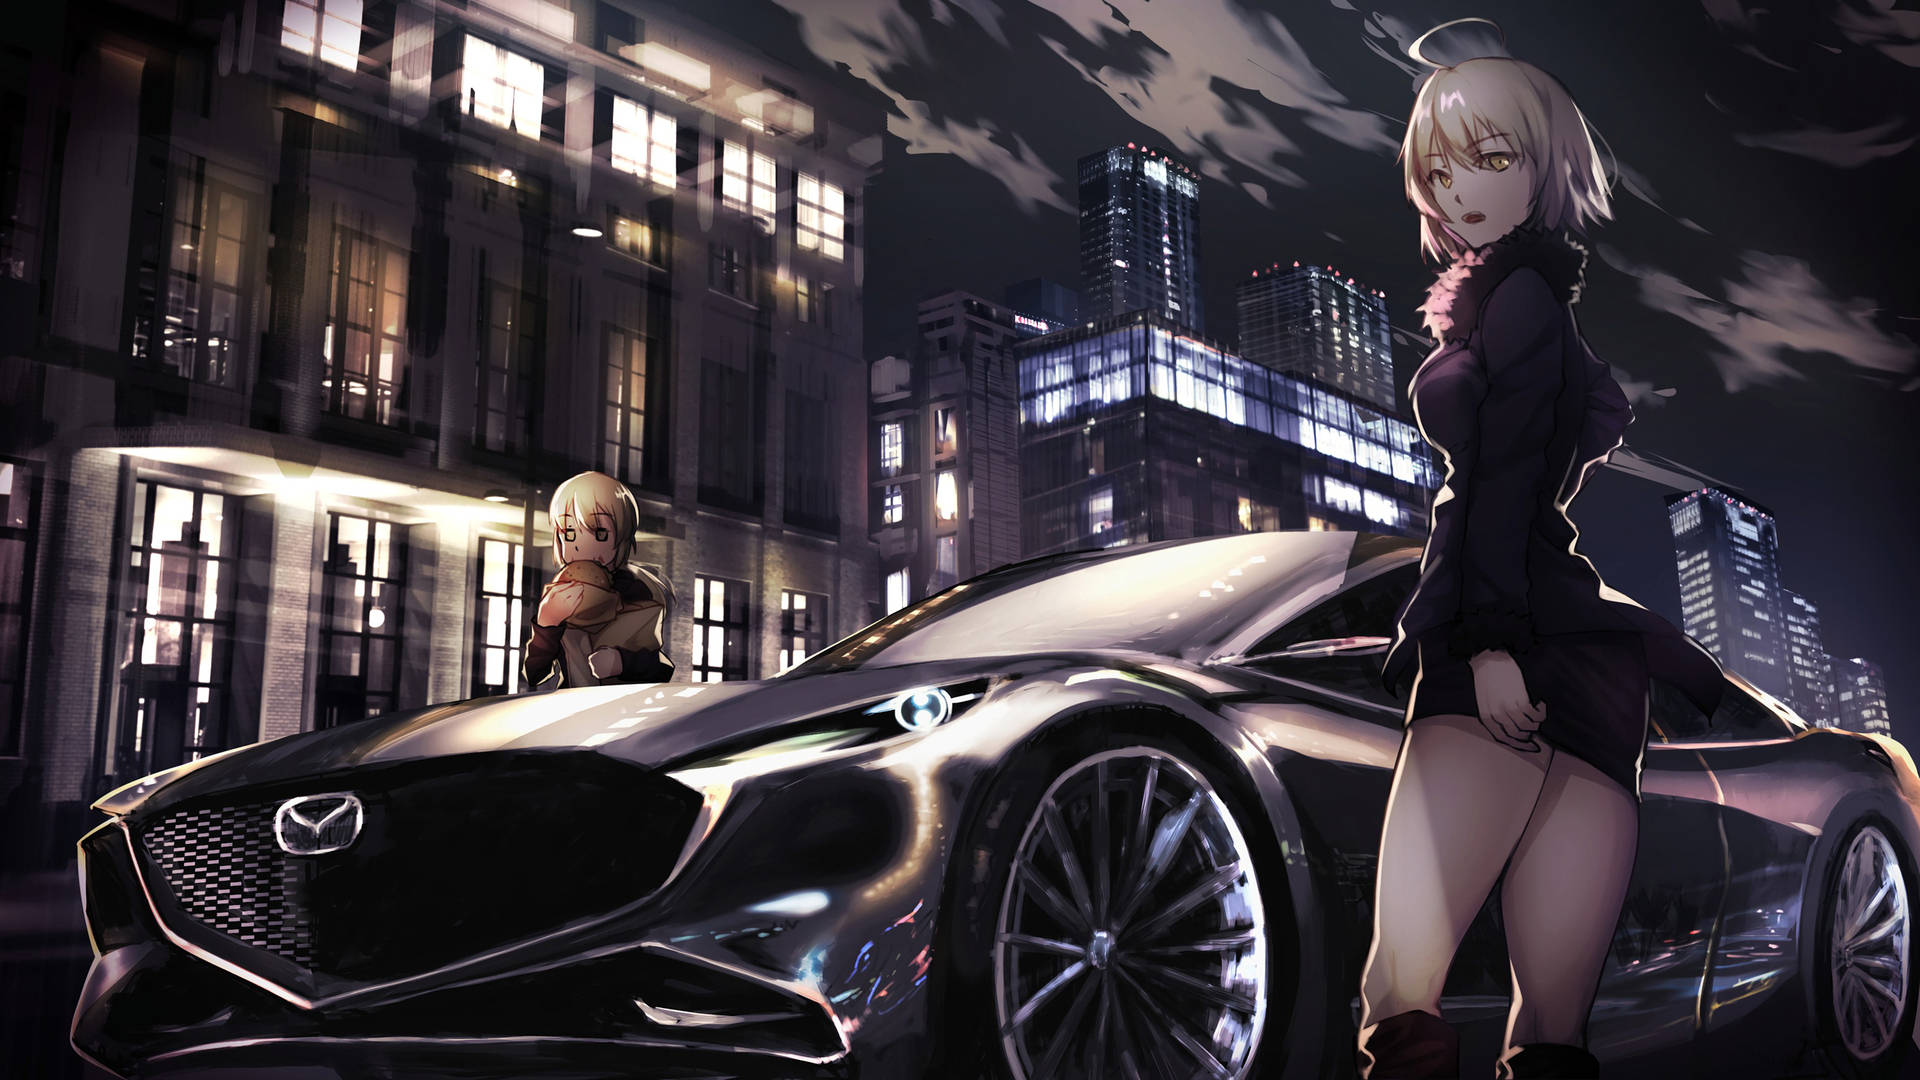 Free Anime Car Wallpaper Downloads, [100+] Anime Car Wallpapers for FREE |  